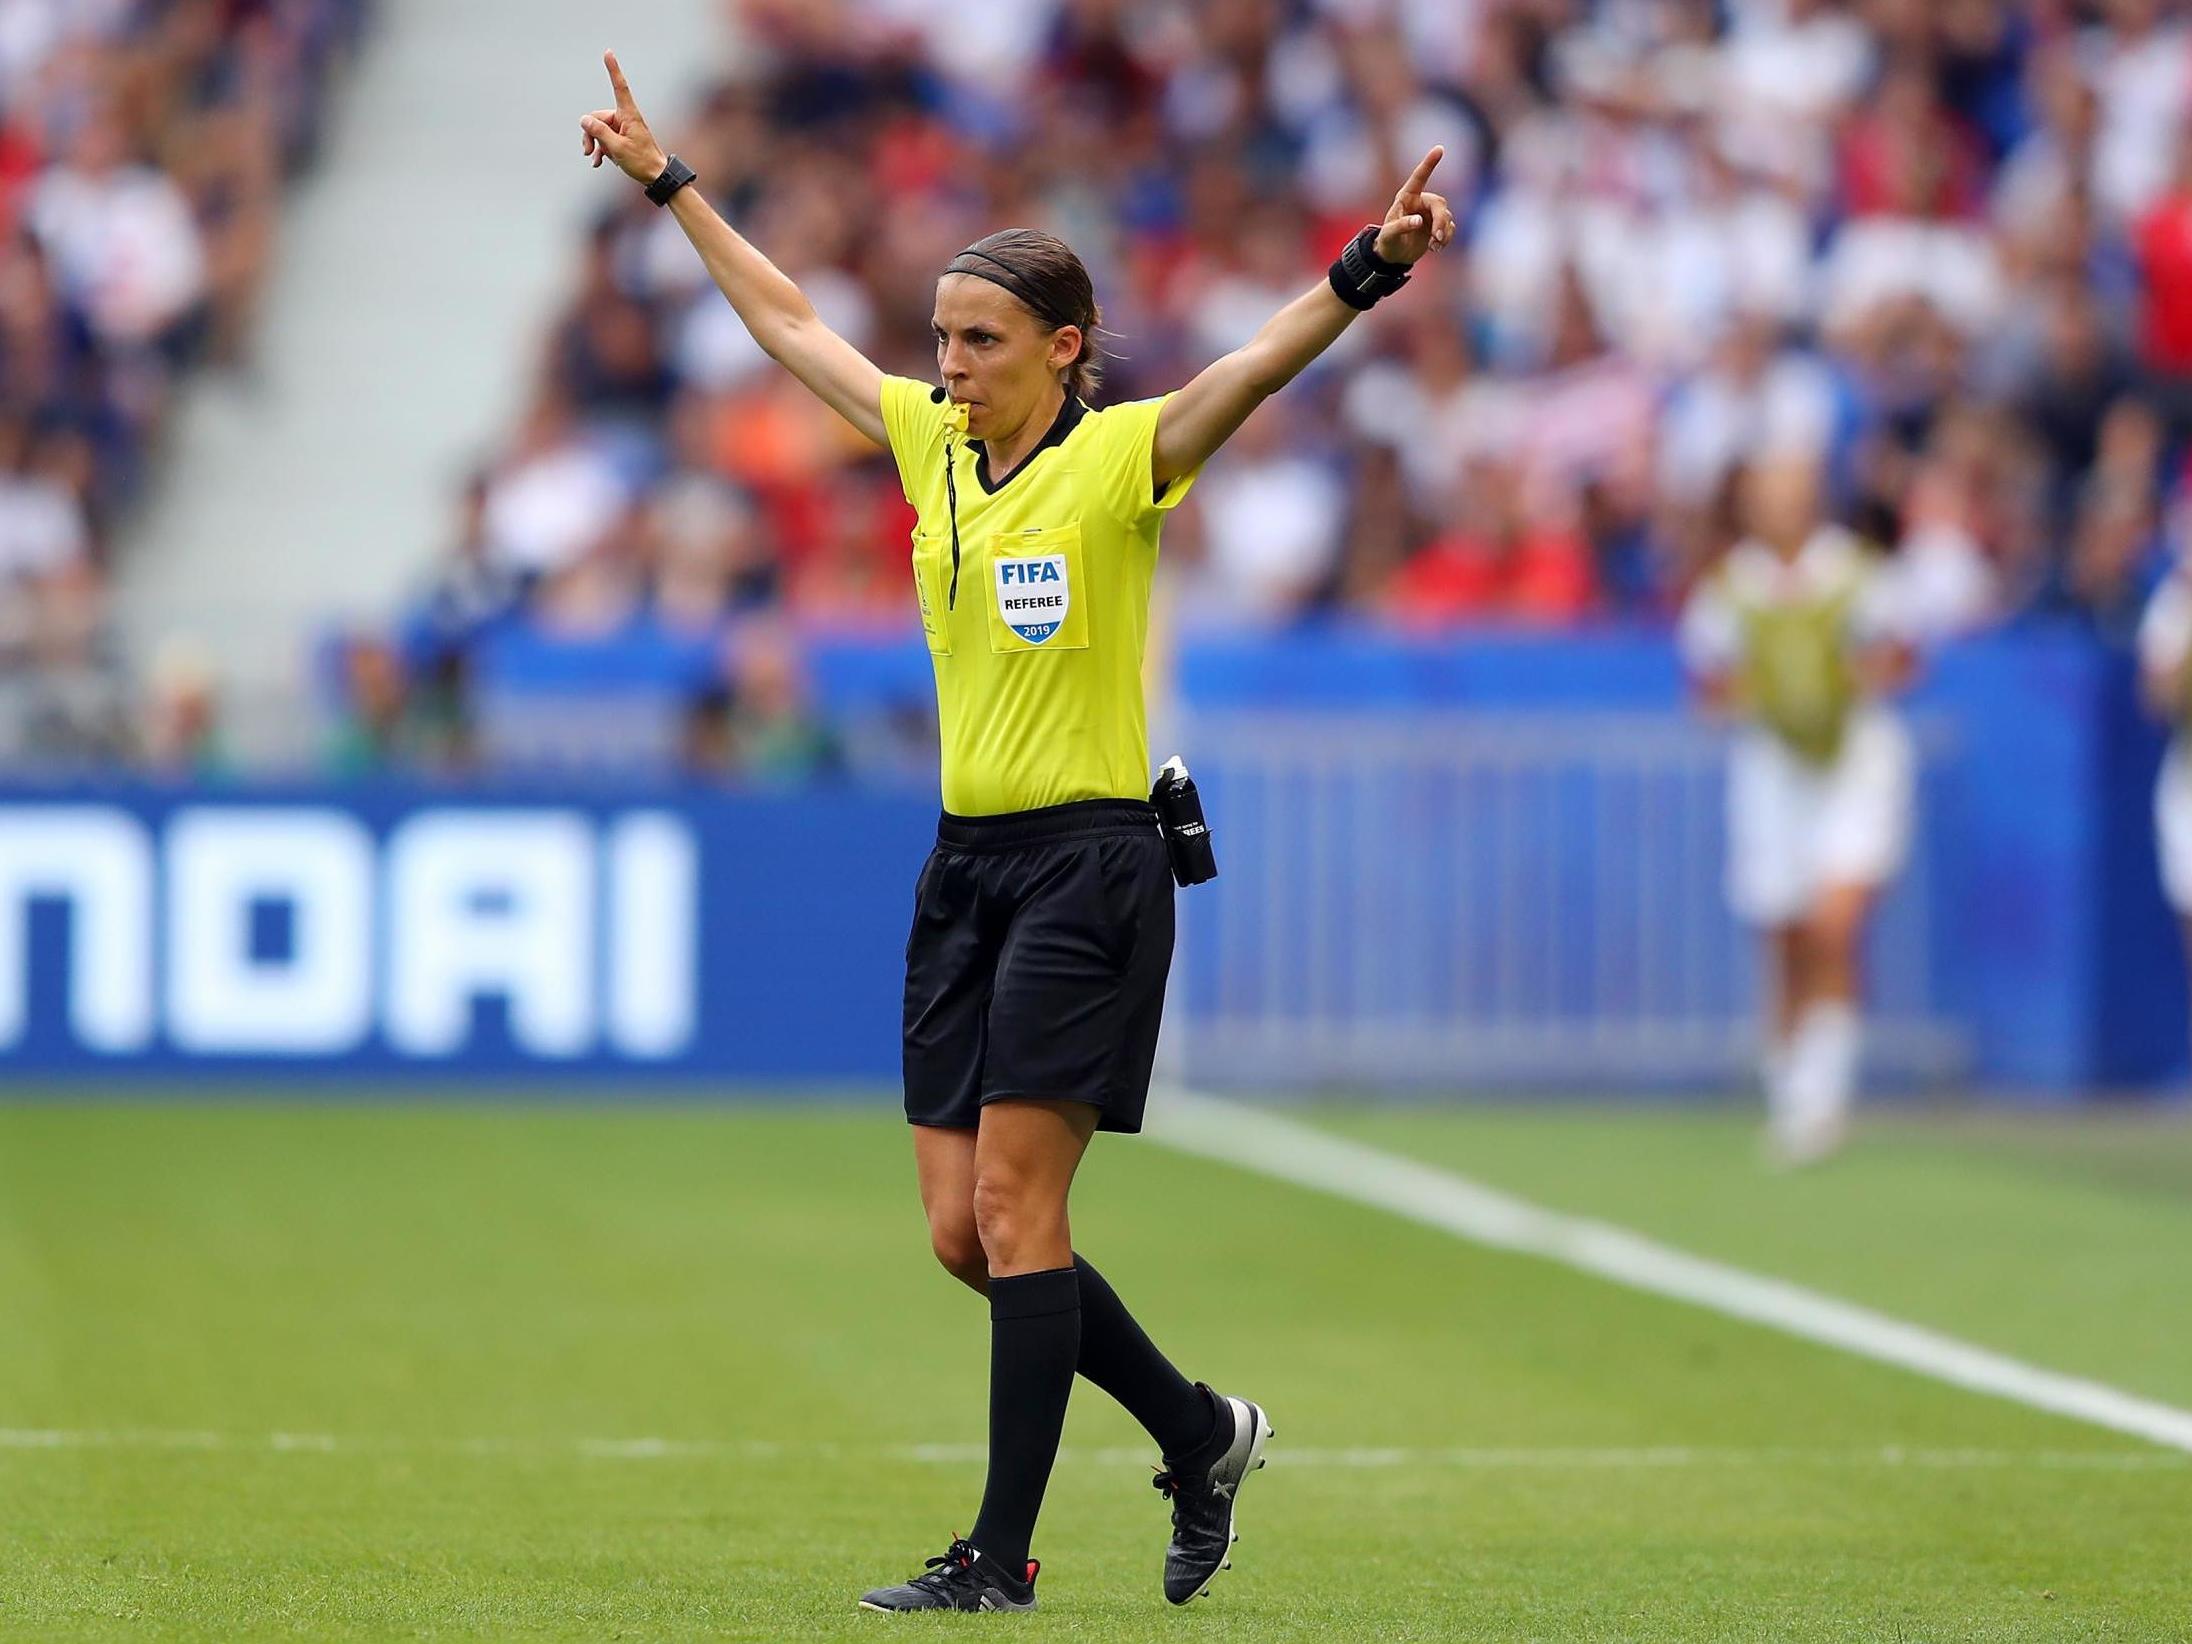 Referee Stephanie Frappart will take charge of Liverpool vs Chelsea